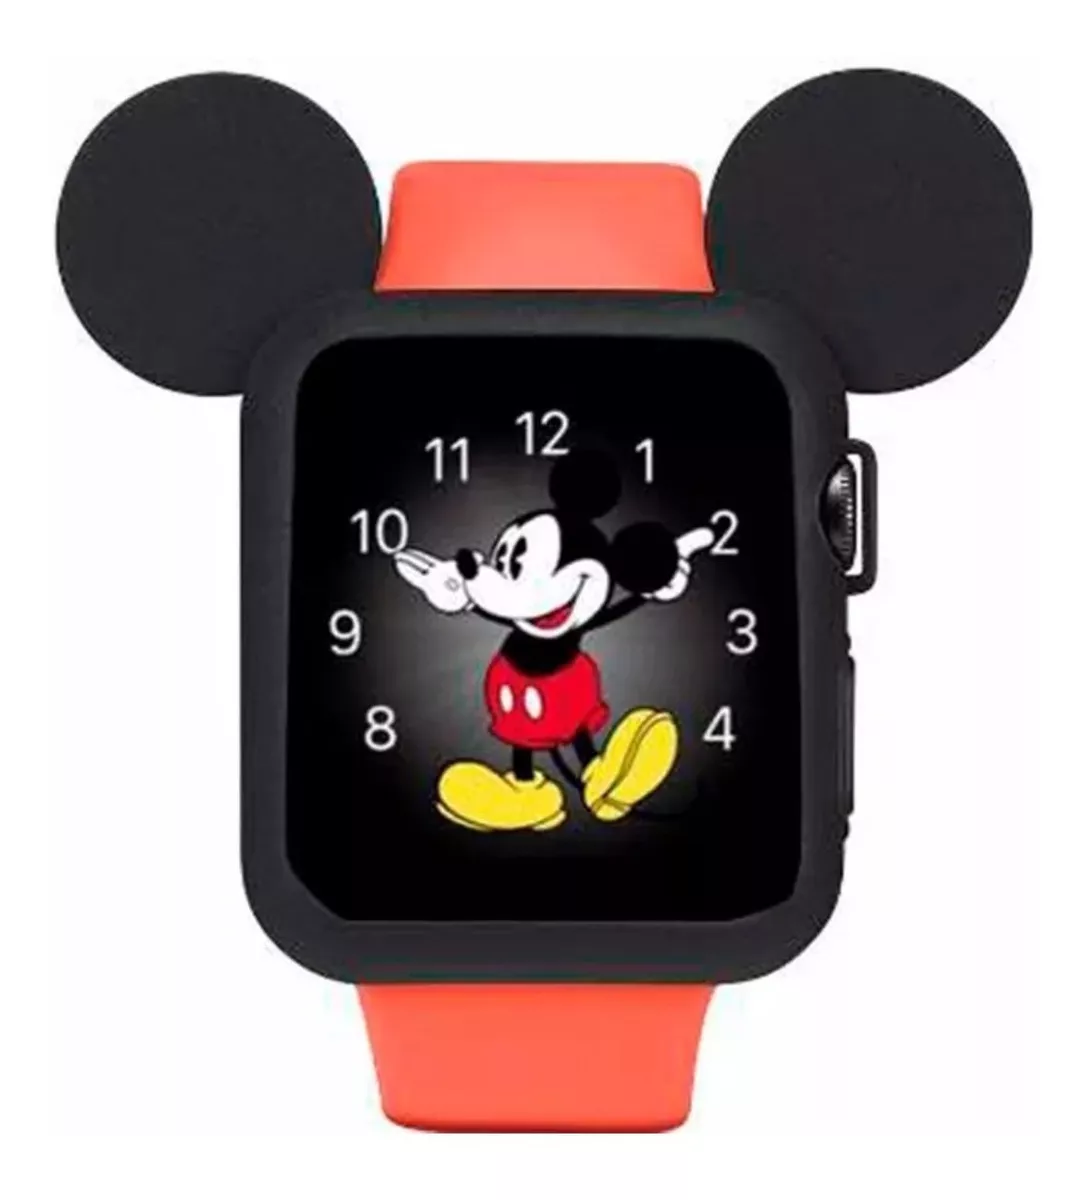 Bumper Protector Mickey Mouse Para Apple Watch 42mm/38mm